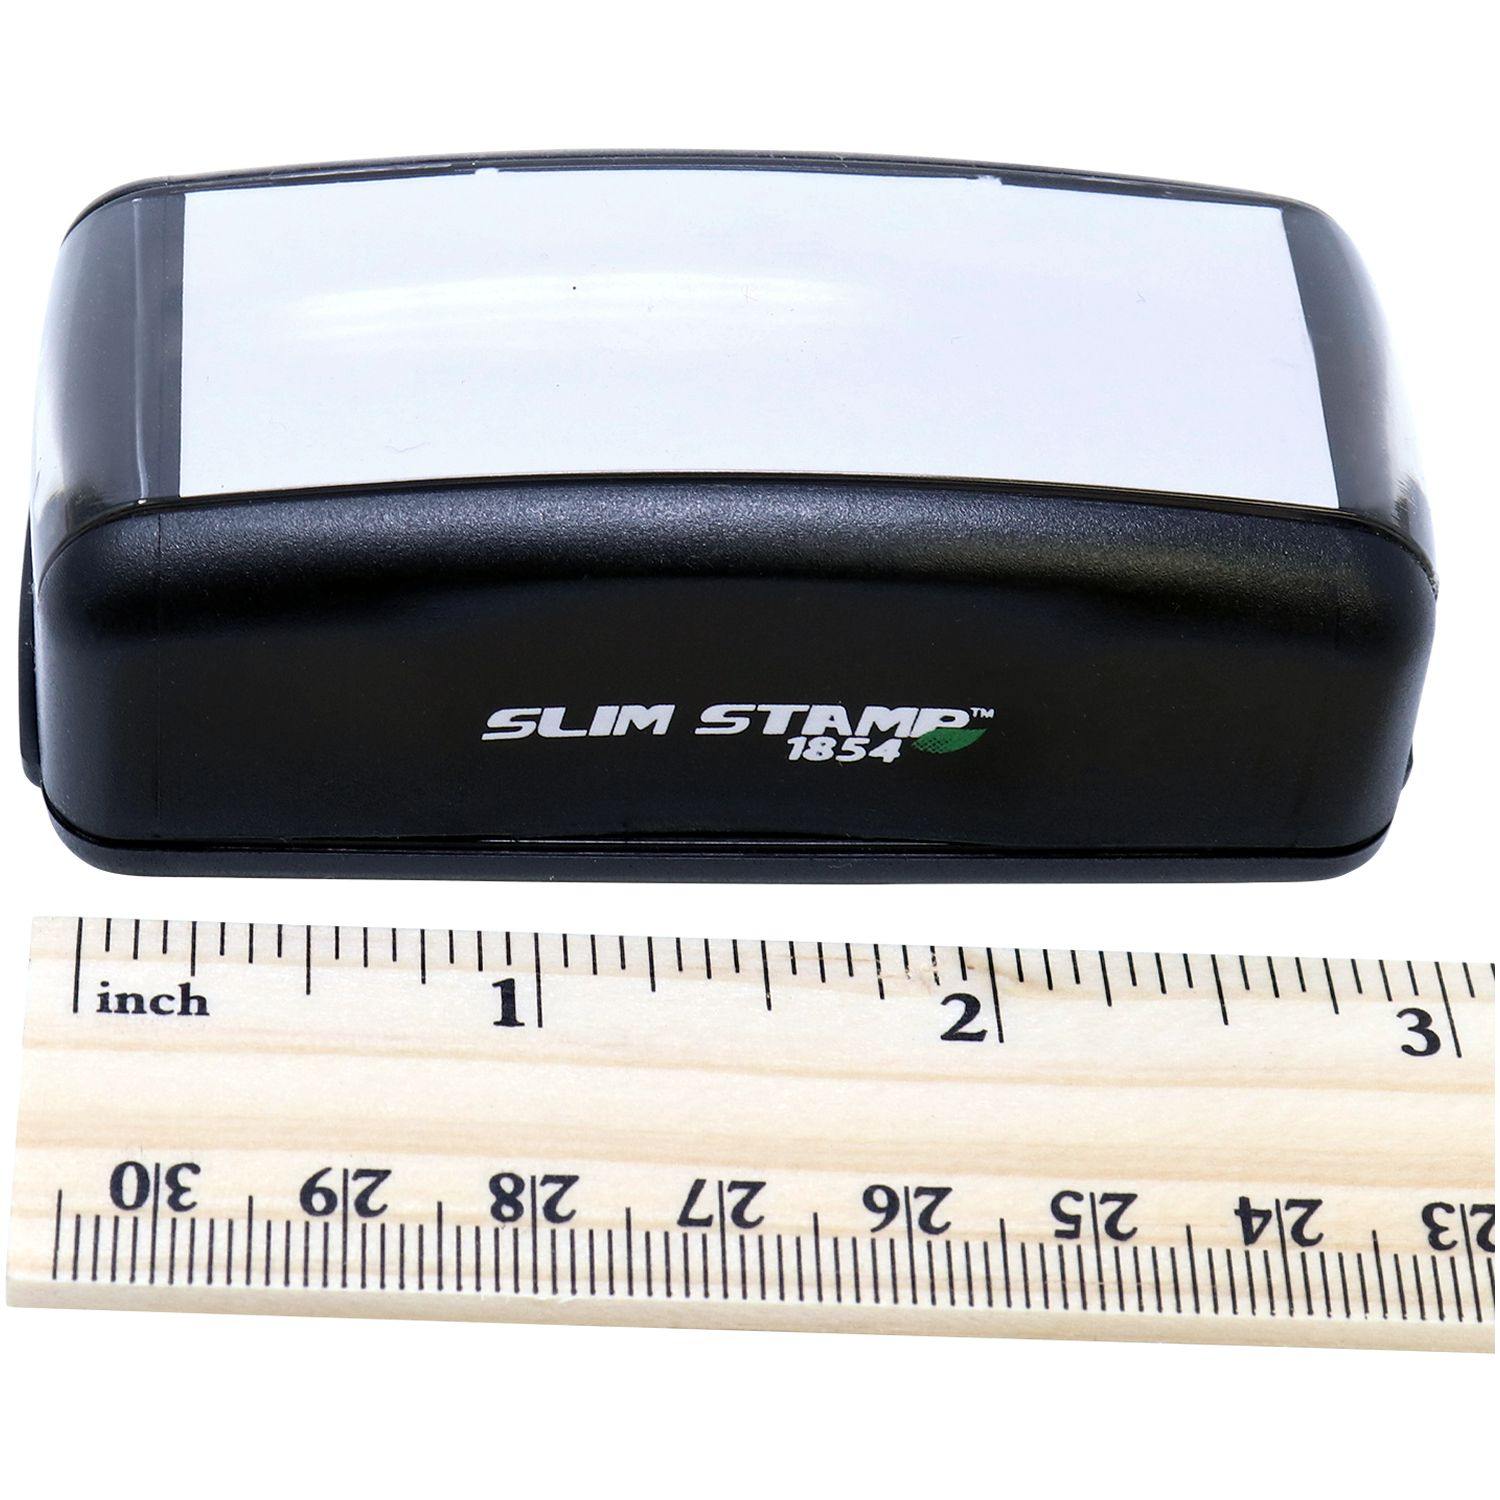 Measurement Large Pre-Inked Asymptomatic Stamp with Ruler